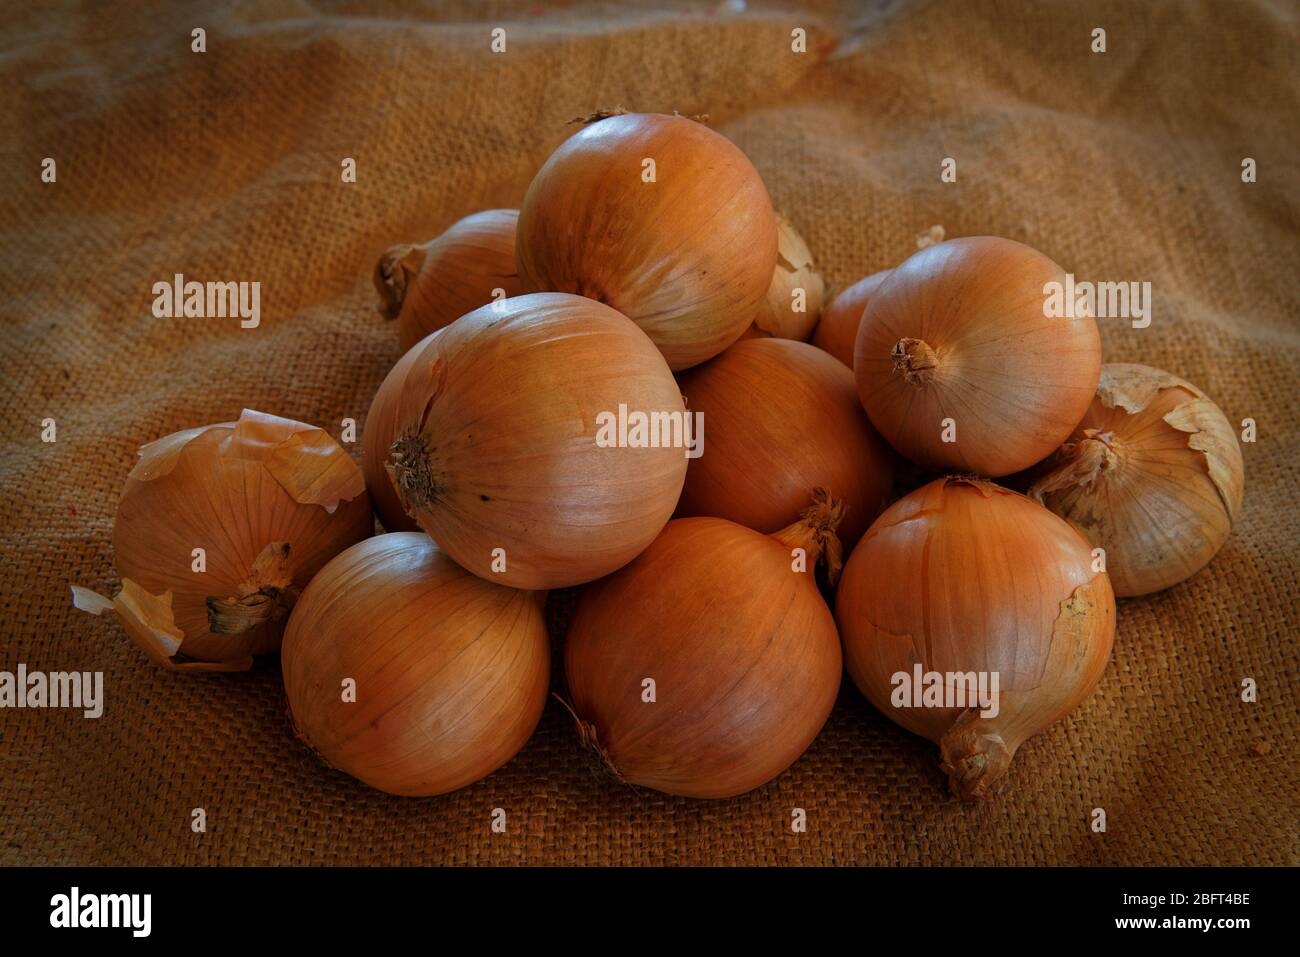 A pile of home grown organic brown onions on a sack. Stock Photo